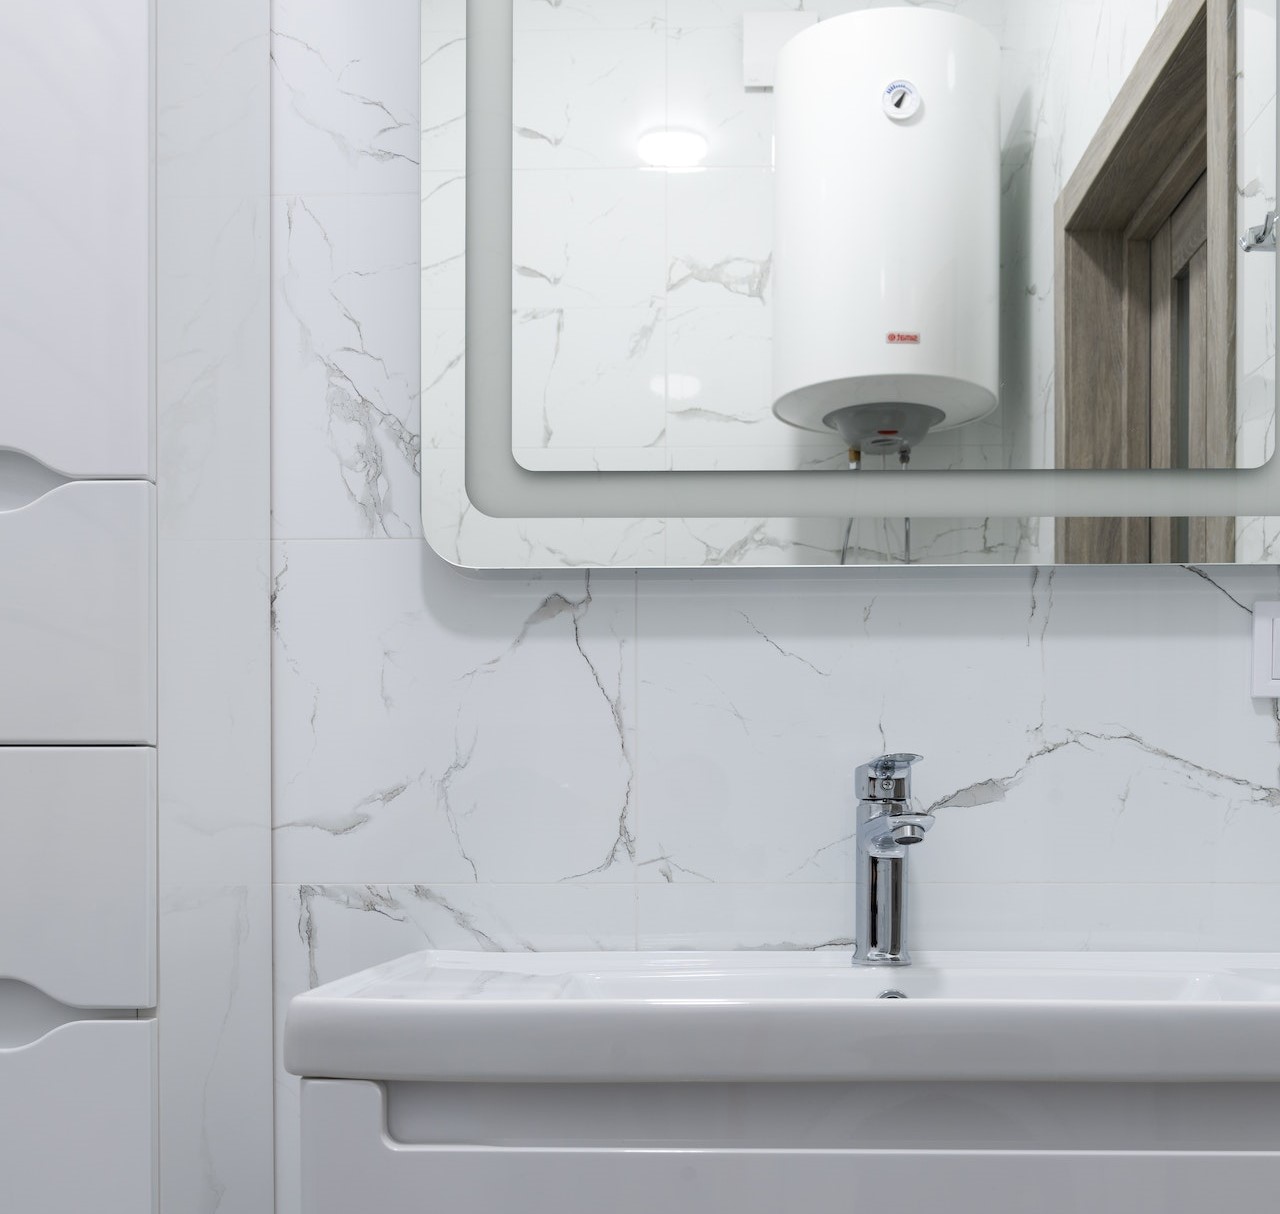 A white marble bathroom with a white boiler in the reflection of the mirror